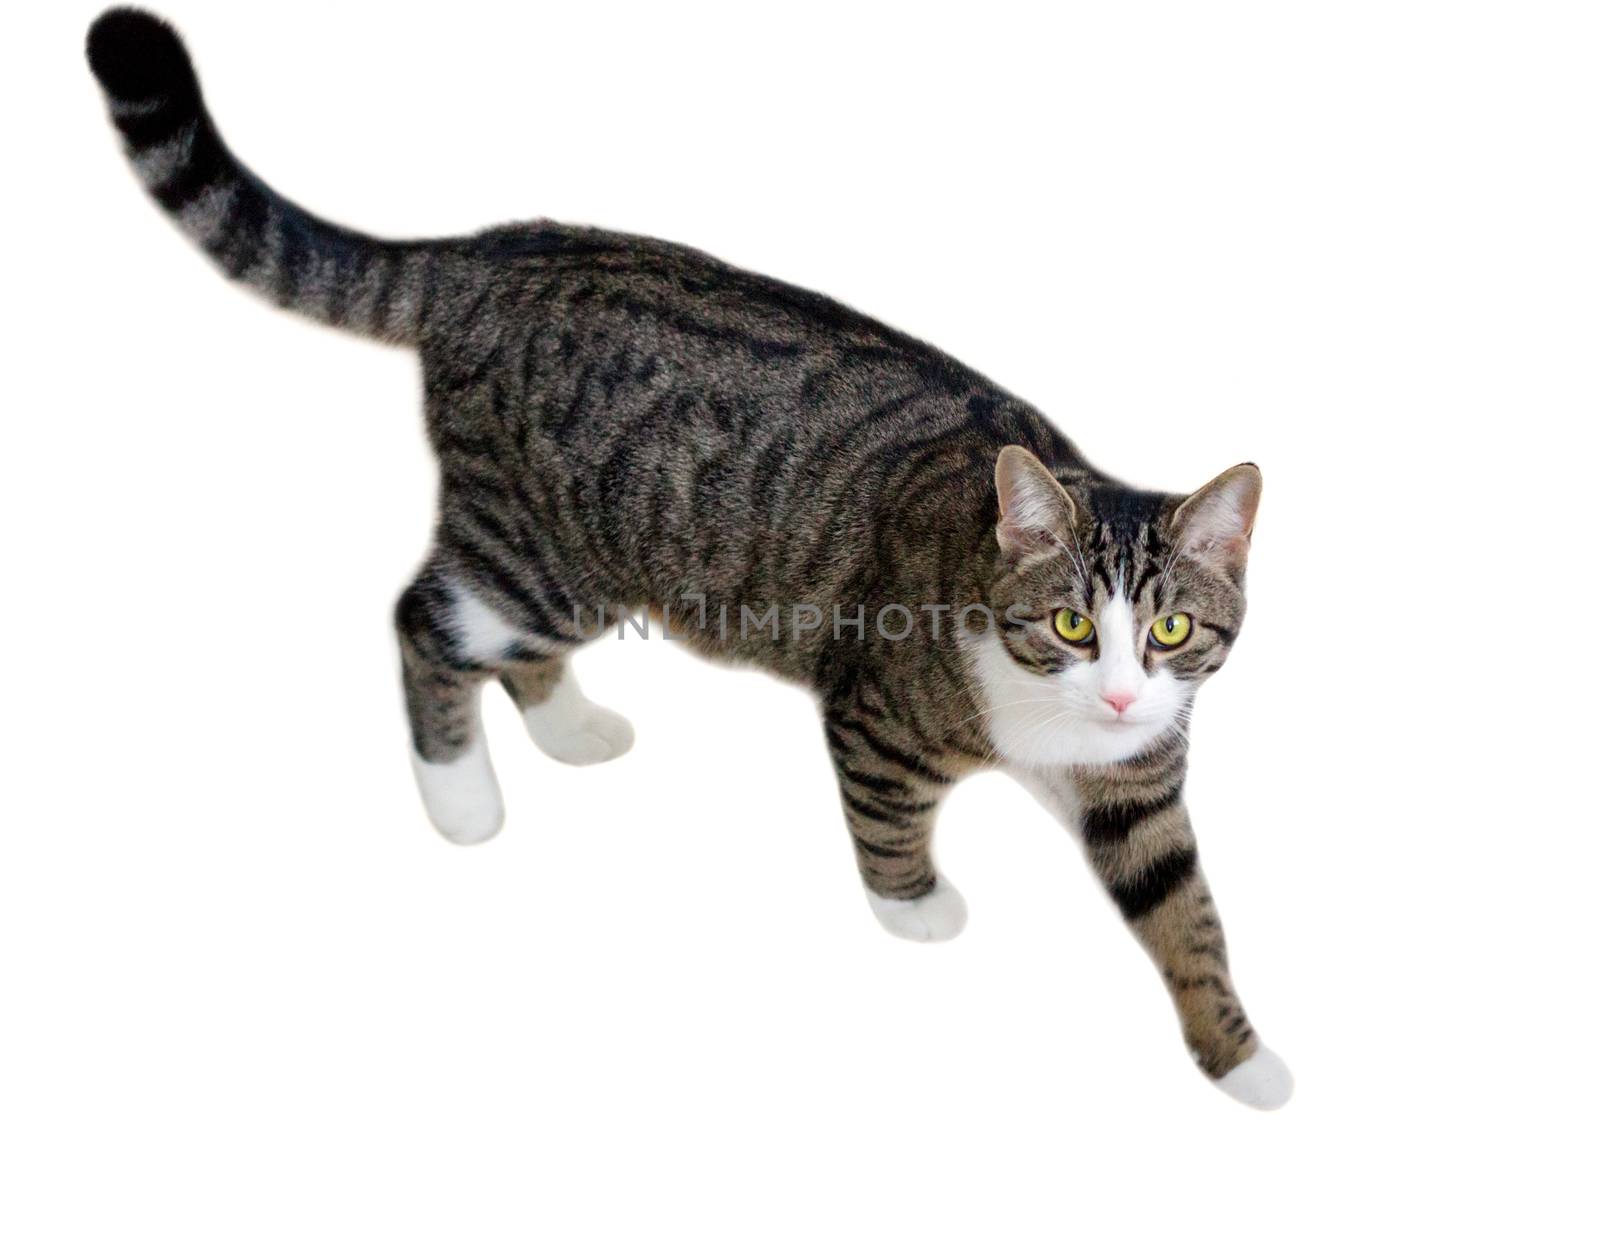 Domestic pet cat with bright green eyes walks watching cautiously and intently